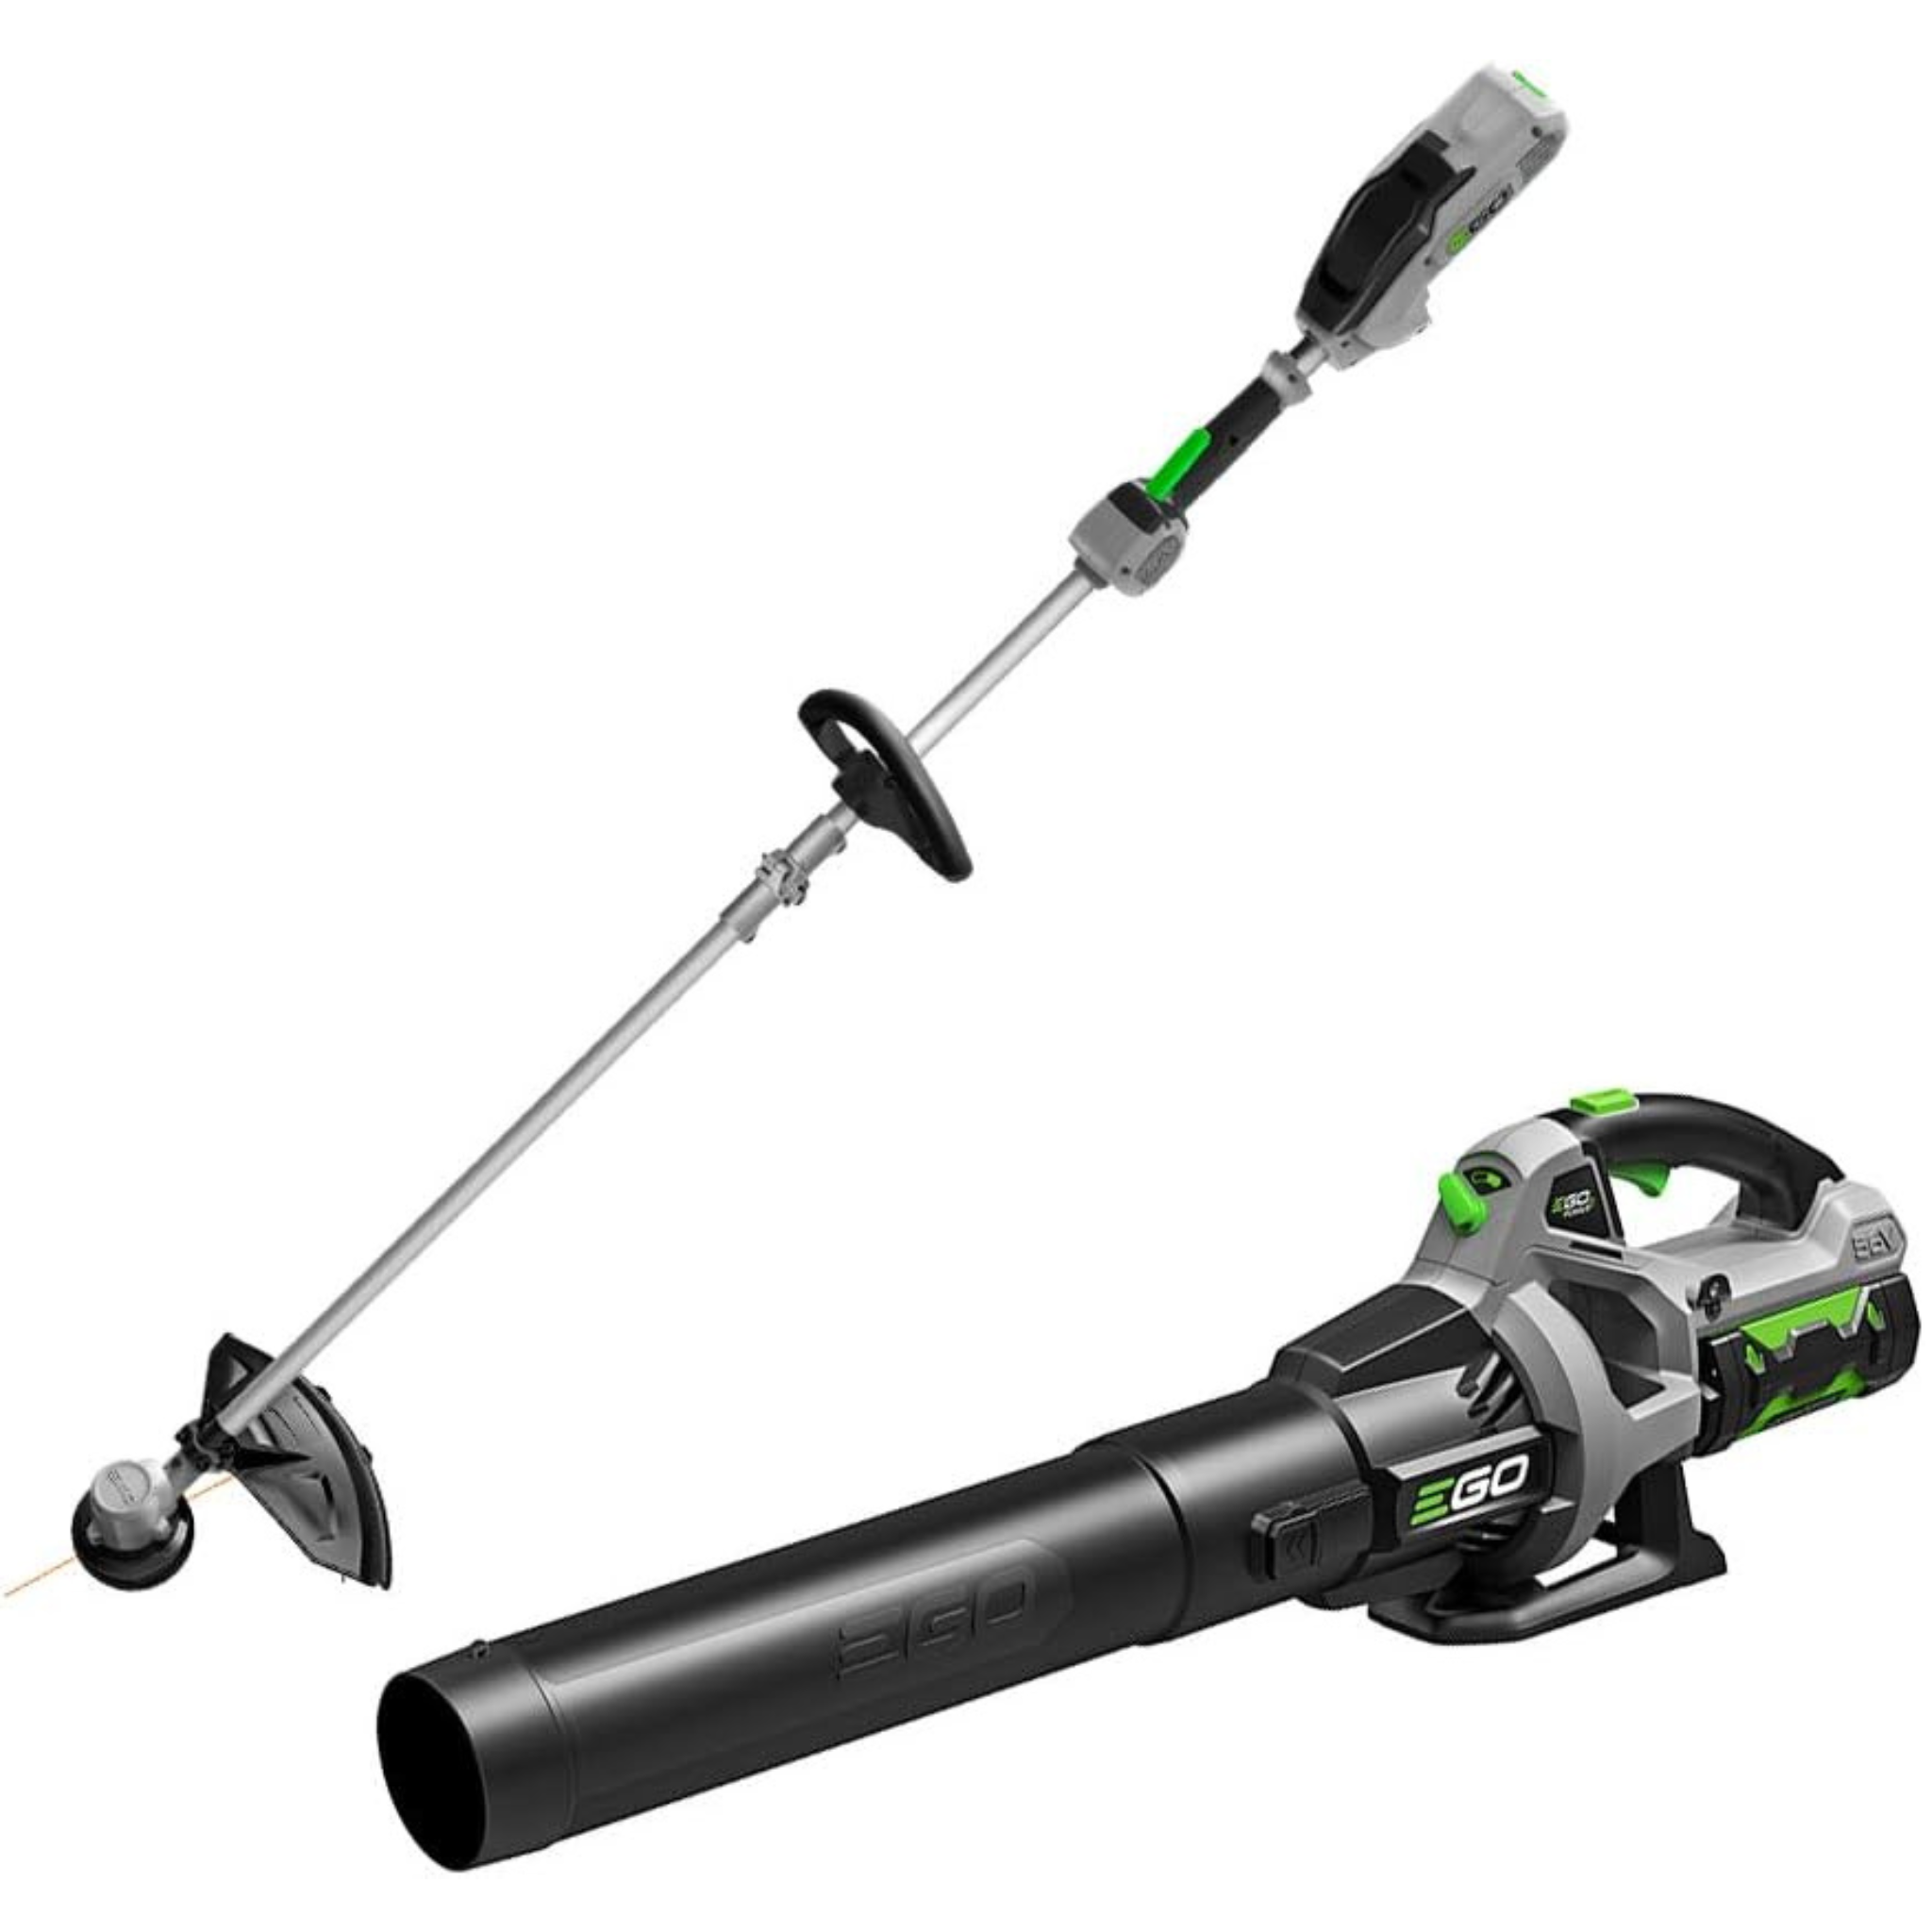 EGO Power+ 15" String Trimmer + Blower + 2.5Ah Battery and Charger